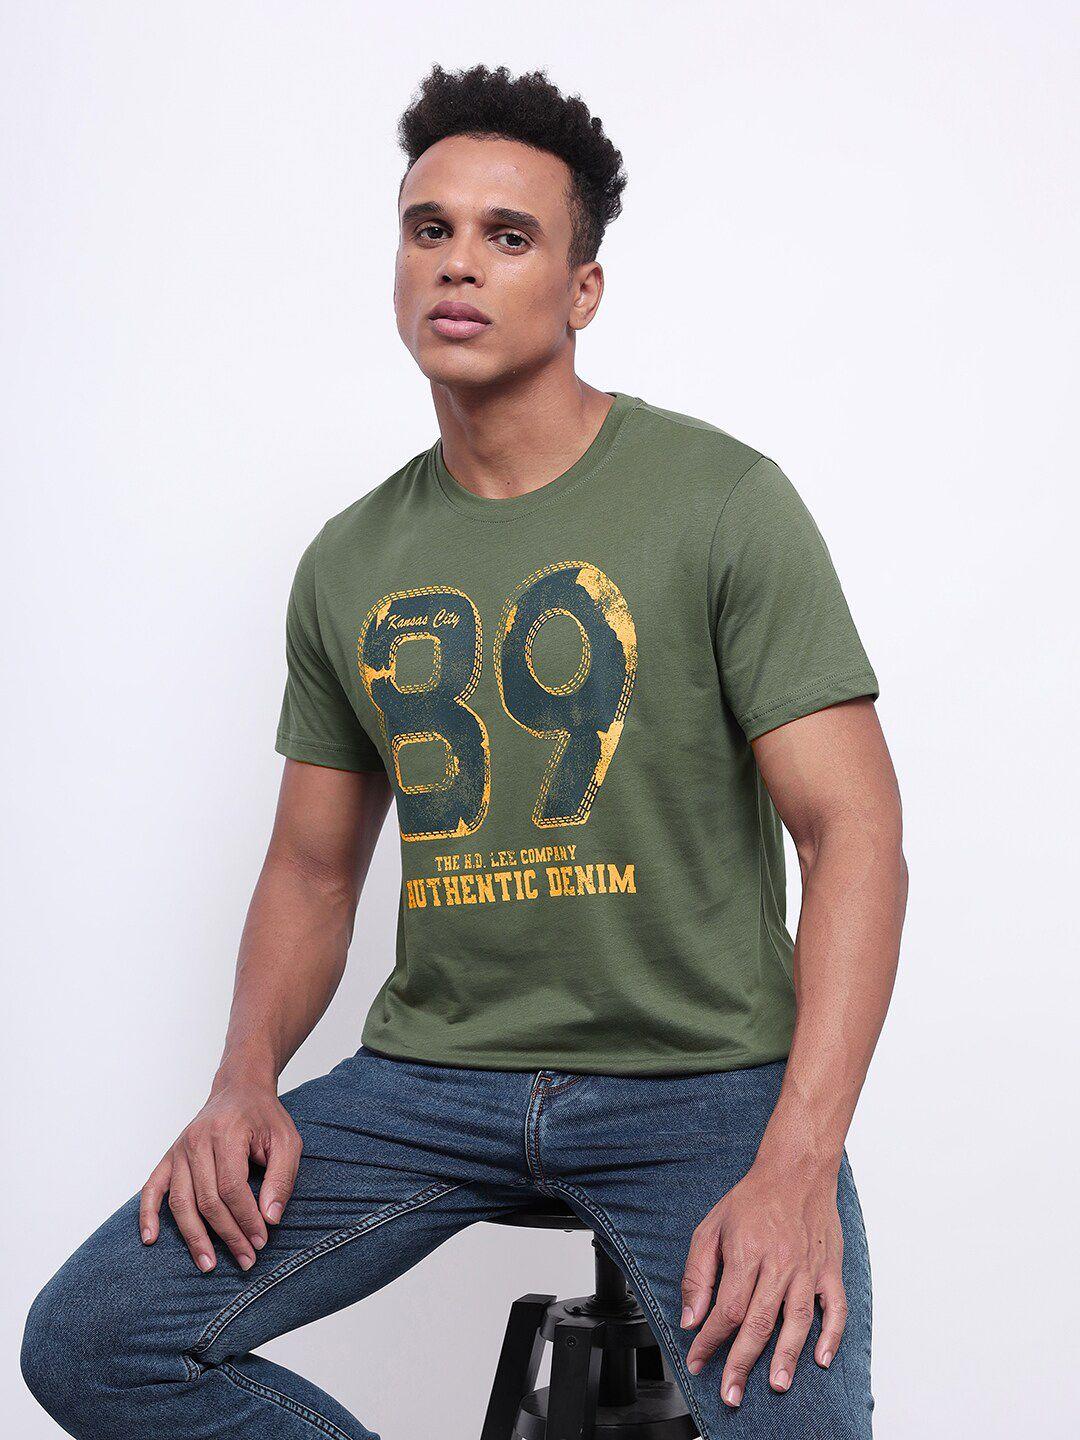 lee typography printed slim fit cotton t-shirt